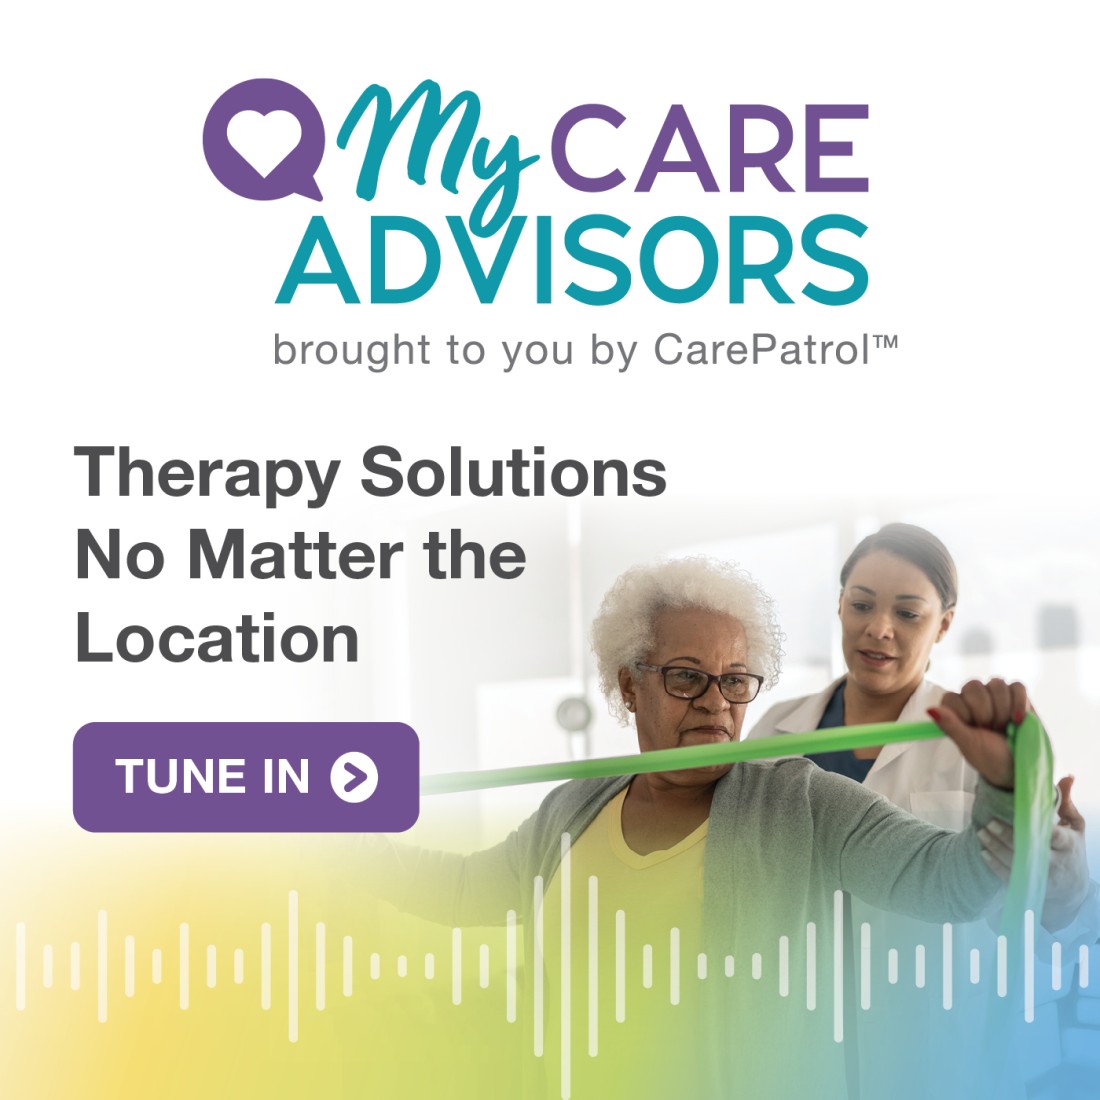 Senior Care Advisors Resources | Senior Care Solutions - Social_Media_Graphic__Therapy_Solutions_No_Matter_the_Location